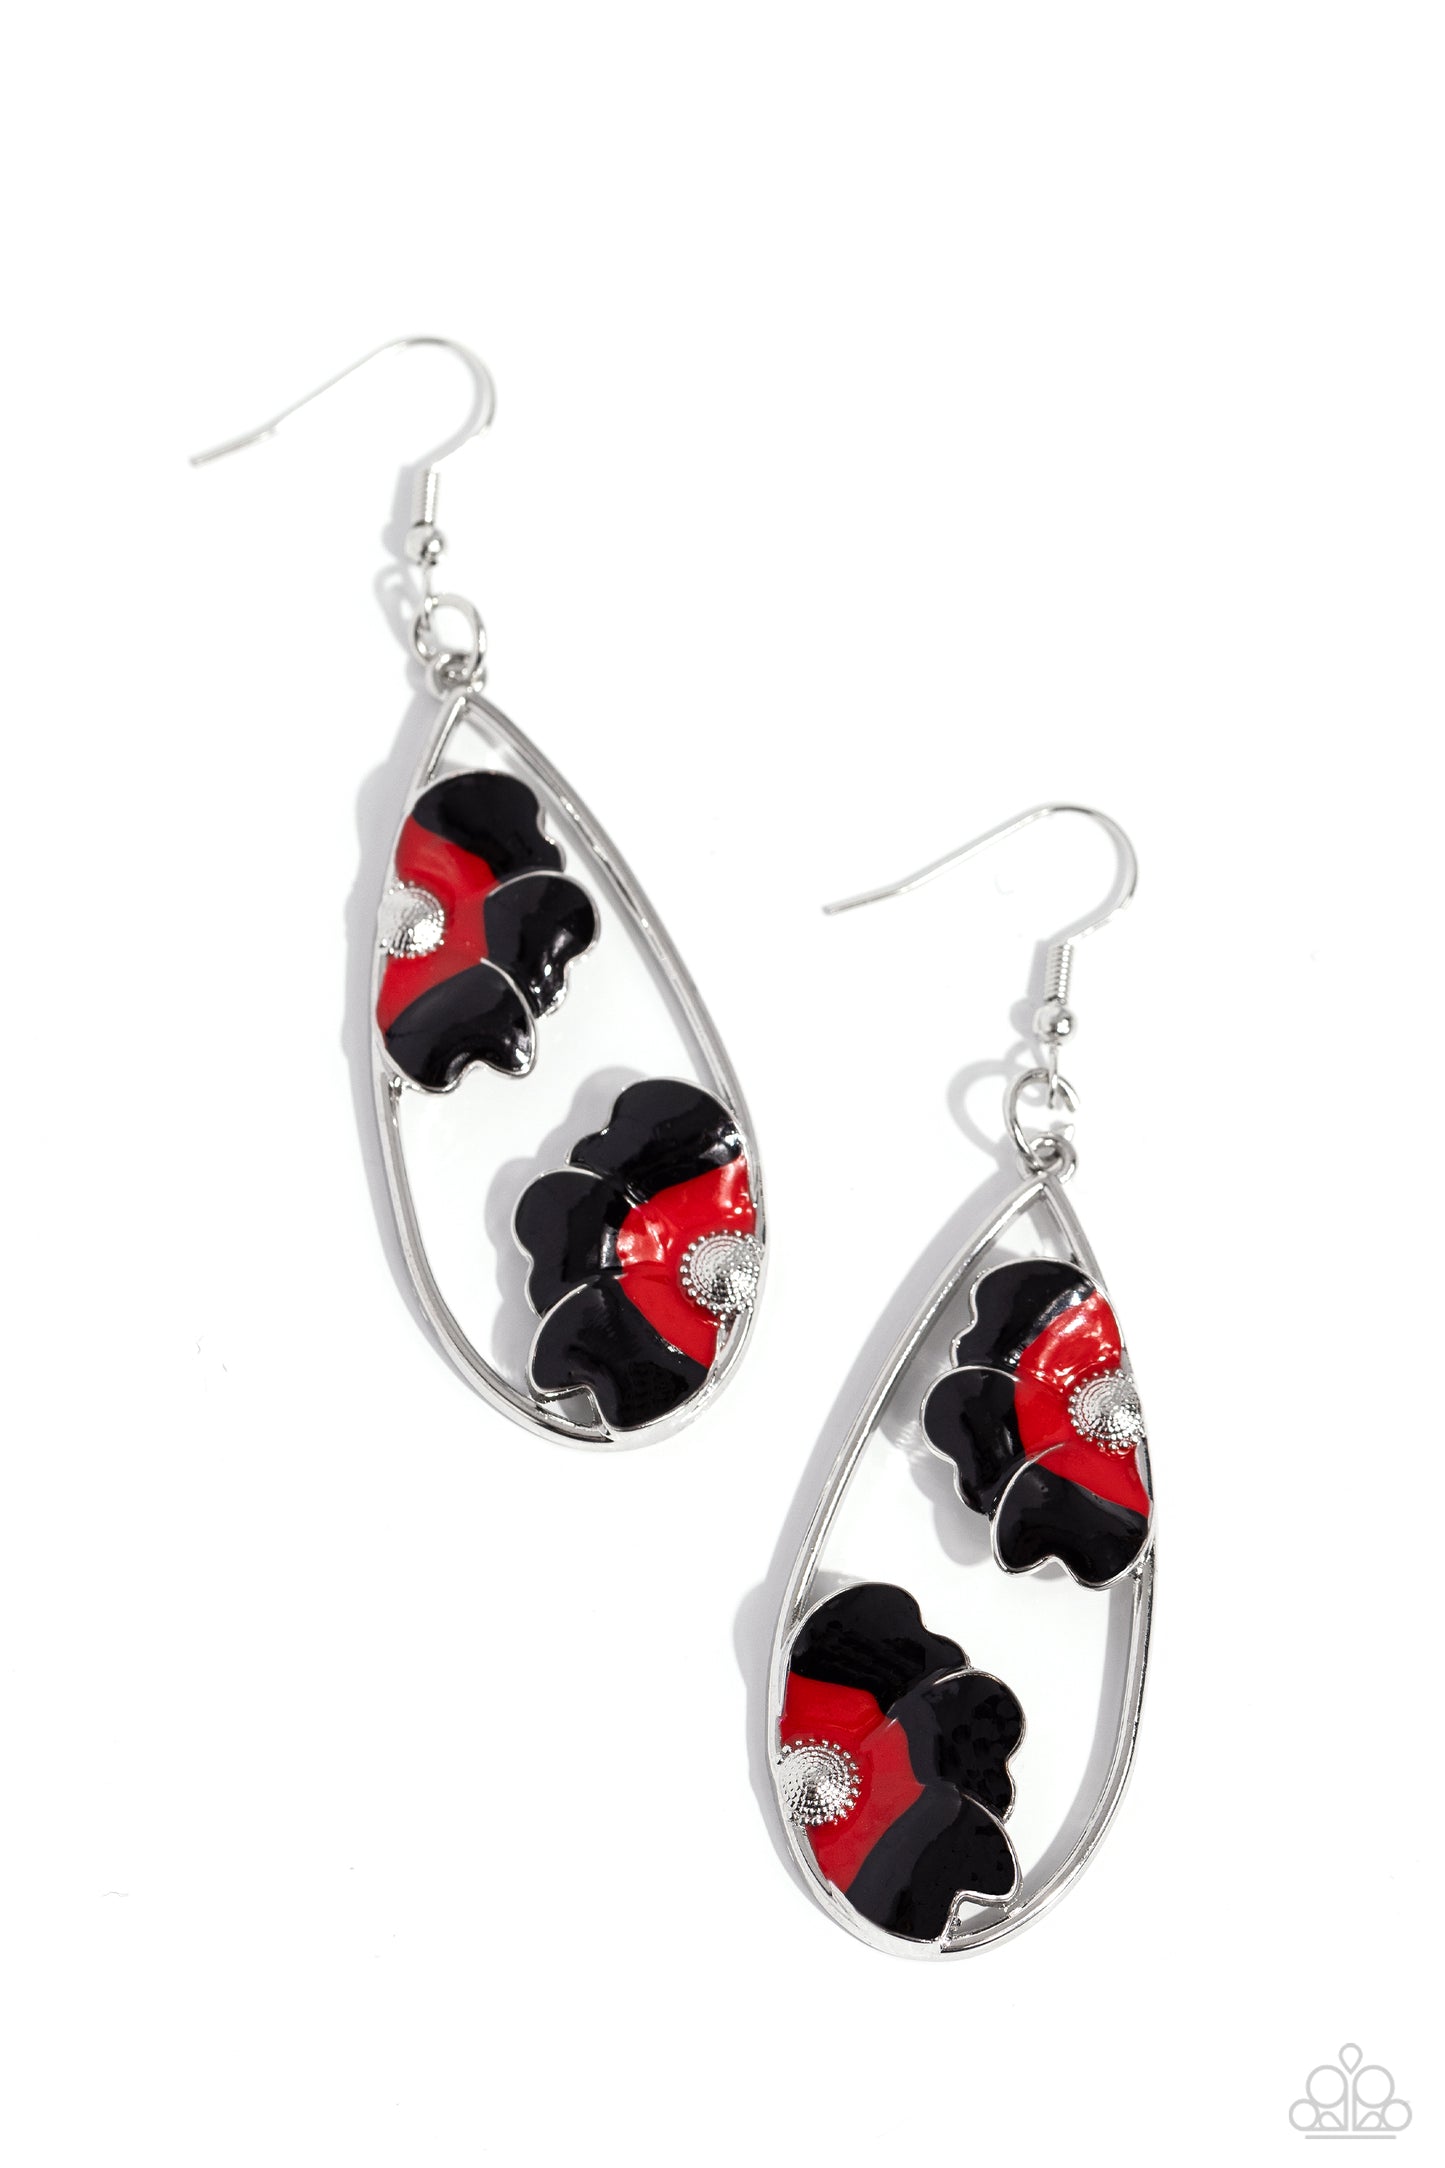 Airily Abloom Black Earring - Paparazzi Accessories  A duo of 3D, textured, red-to-black petals blooms from silver studded centers assembling inside an airy silver teardrop for a whimsical statement. Earring attaches to a standard fishhook fitting.  Sold as one pair of earrings.  Sku:  P5WH-BKXX-240XX